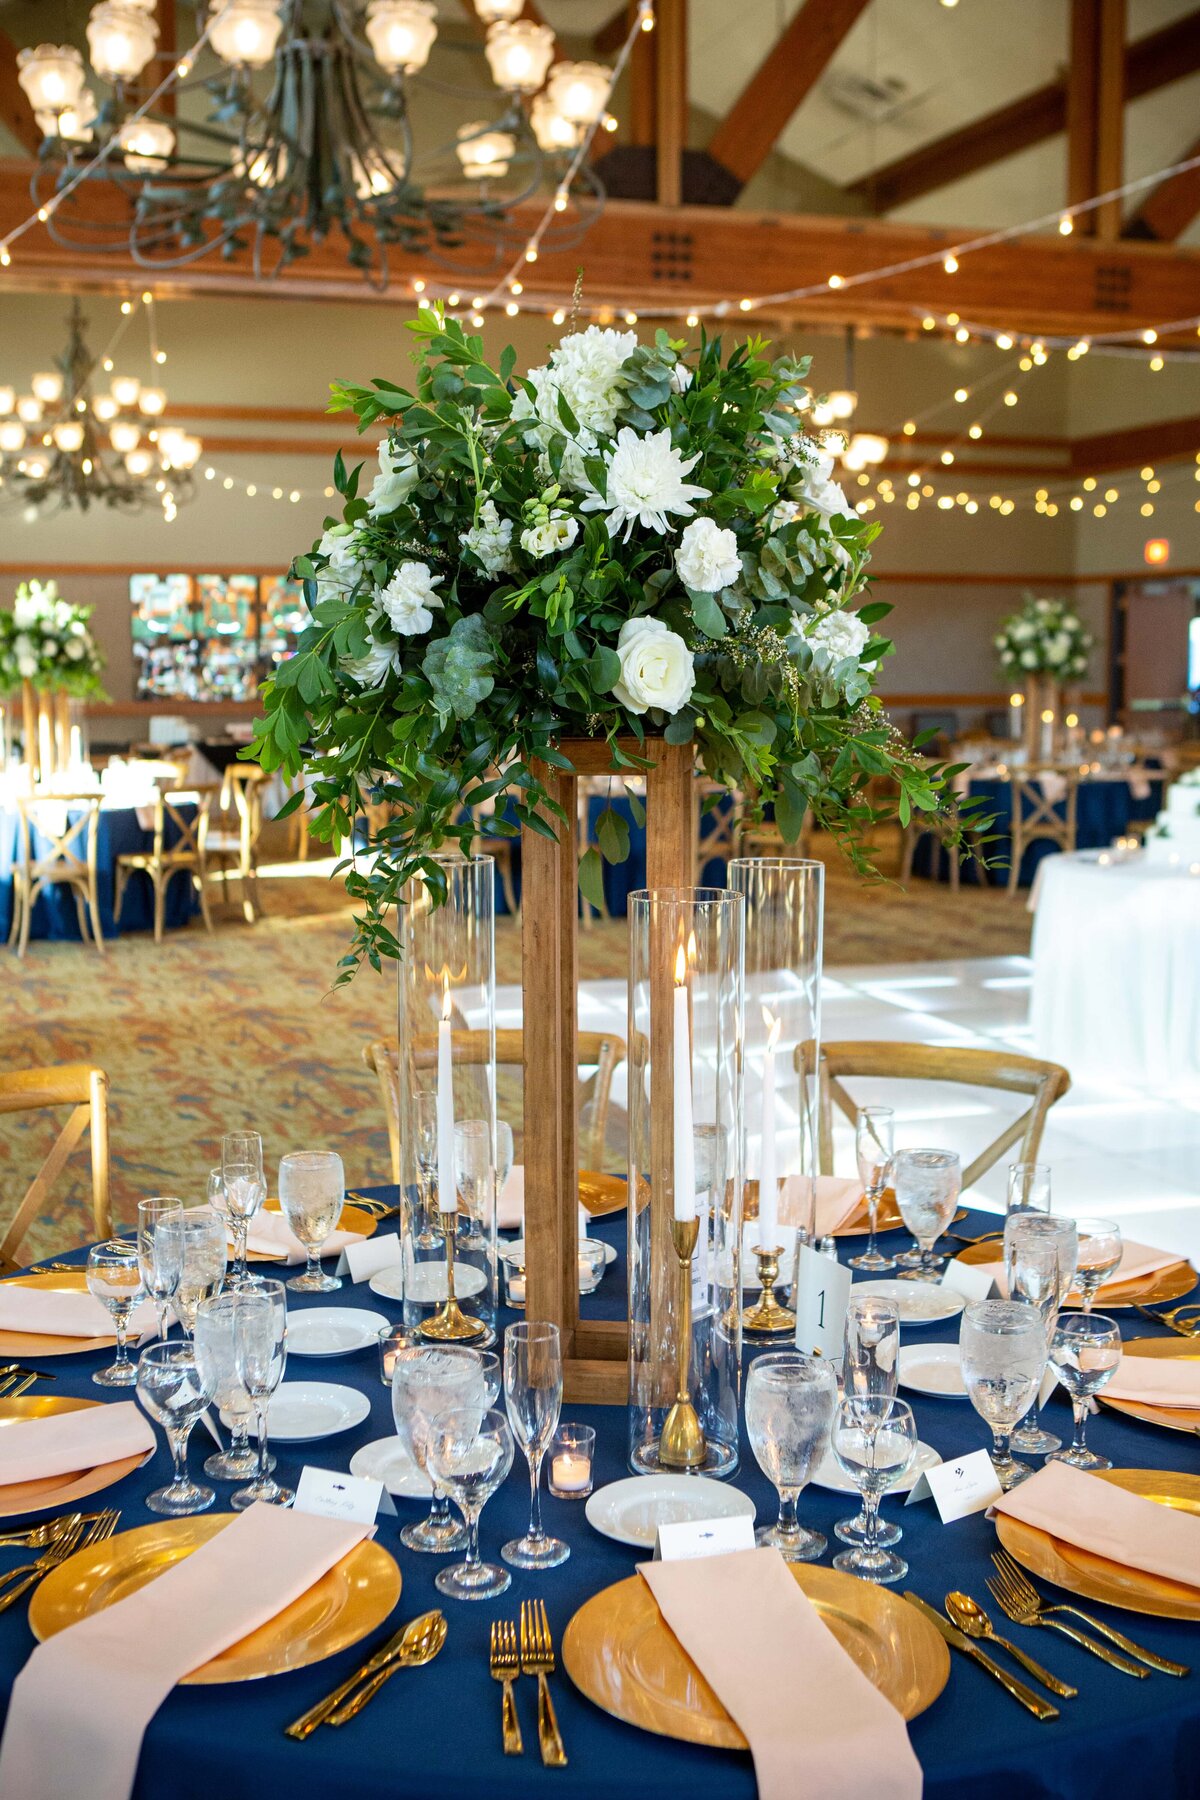 Elegant wedding table setting at a park farm winery, featuring a tall floral centerpiece, navy blue tablecloth, gold accents, and glassware under string lights.